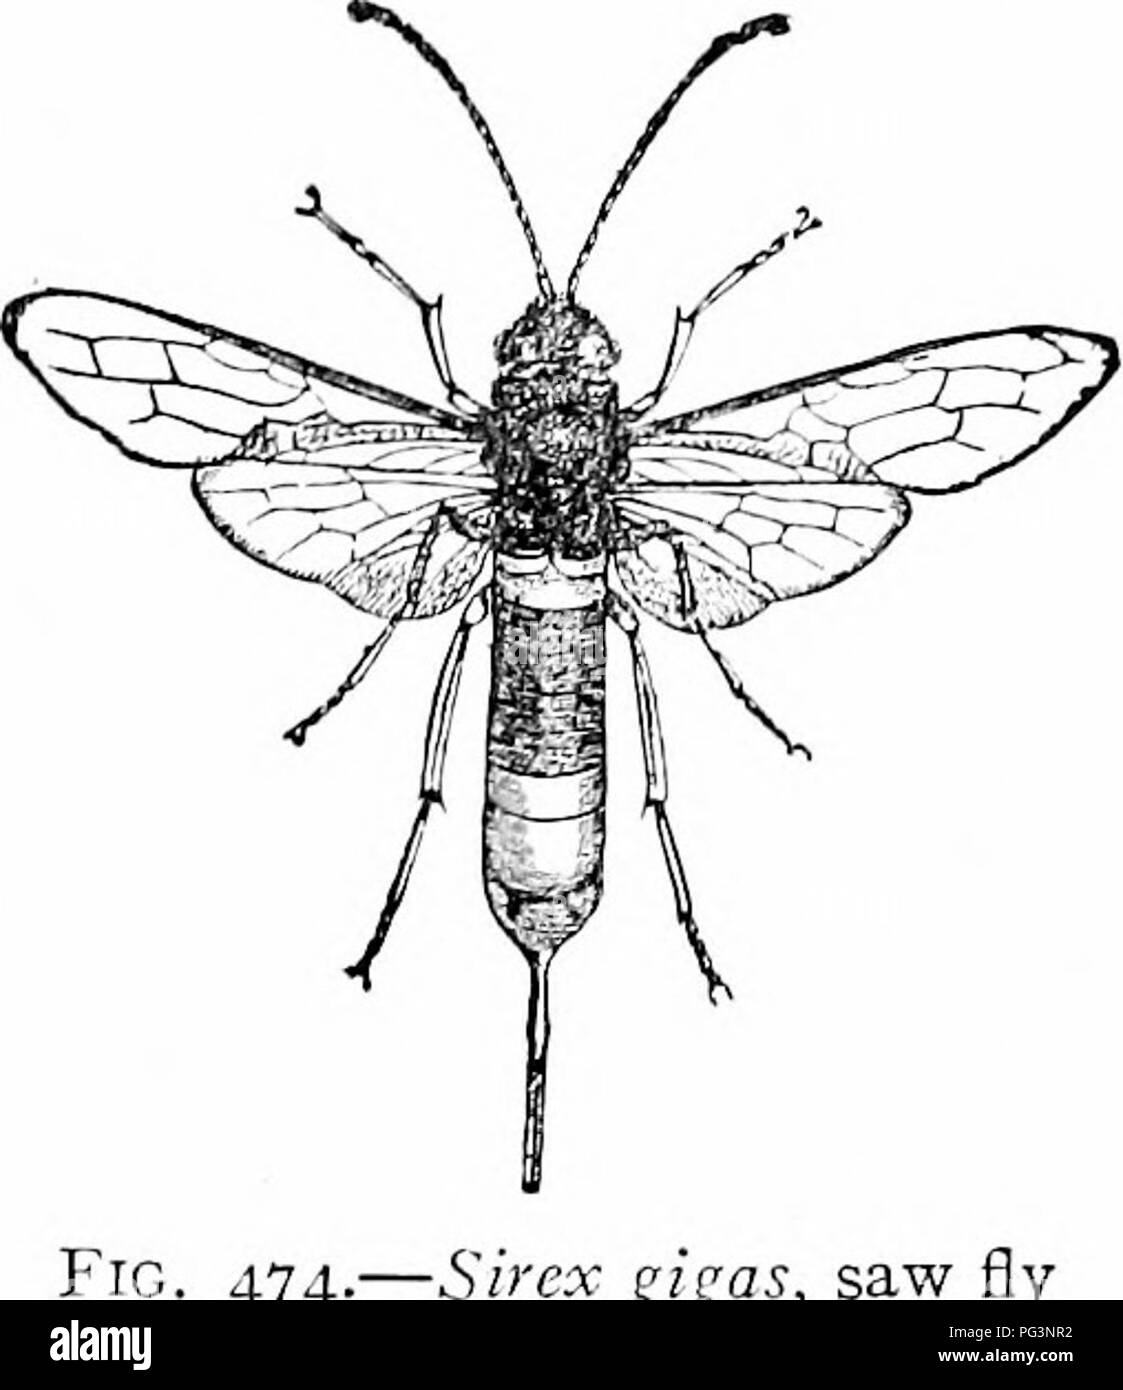 . A manual of zoology. Zoology. IV. INSECTA: HEXAPODA, HYMENOPTERA 425. 474.—Sirex gigas, saw Sy (after Taschenberg). exceeds the (&gt;thcr thoracic somites, so that these, especially the prothorax, seem but parts of the strong mesothorax. Besides, the first abdominal ring unites to the thorax so intimately in the Entophaga and Aculeata as to seem part of it. The constriction which then separates thorax and abdo- men comes between the first and second abdominal somites, and when the second (petiole) is elongate the stalked abdomen, familiar in the wasps, results. The sexes are distinguished by Stock Photo